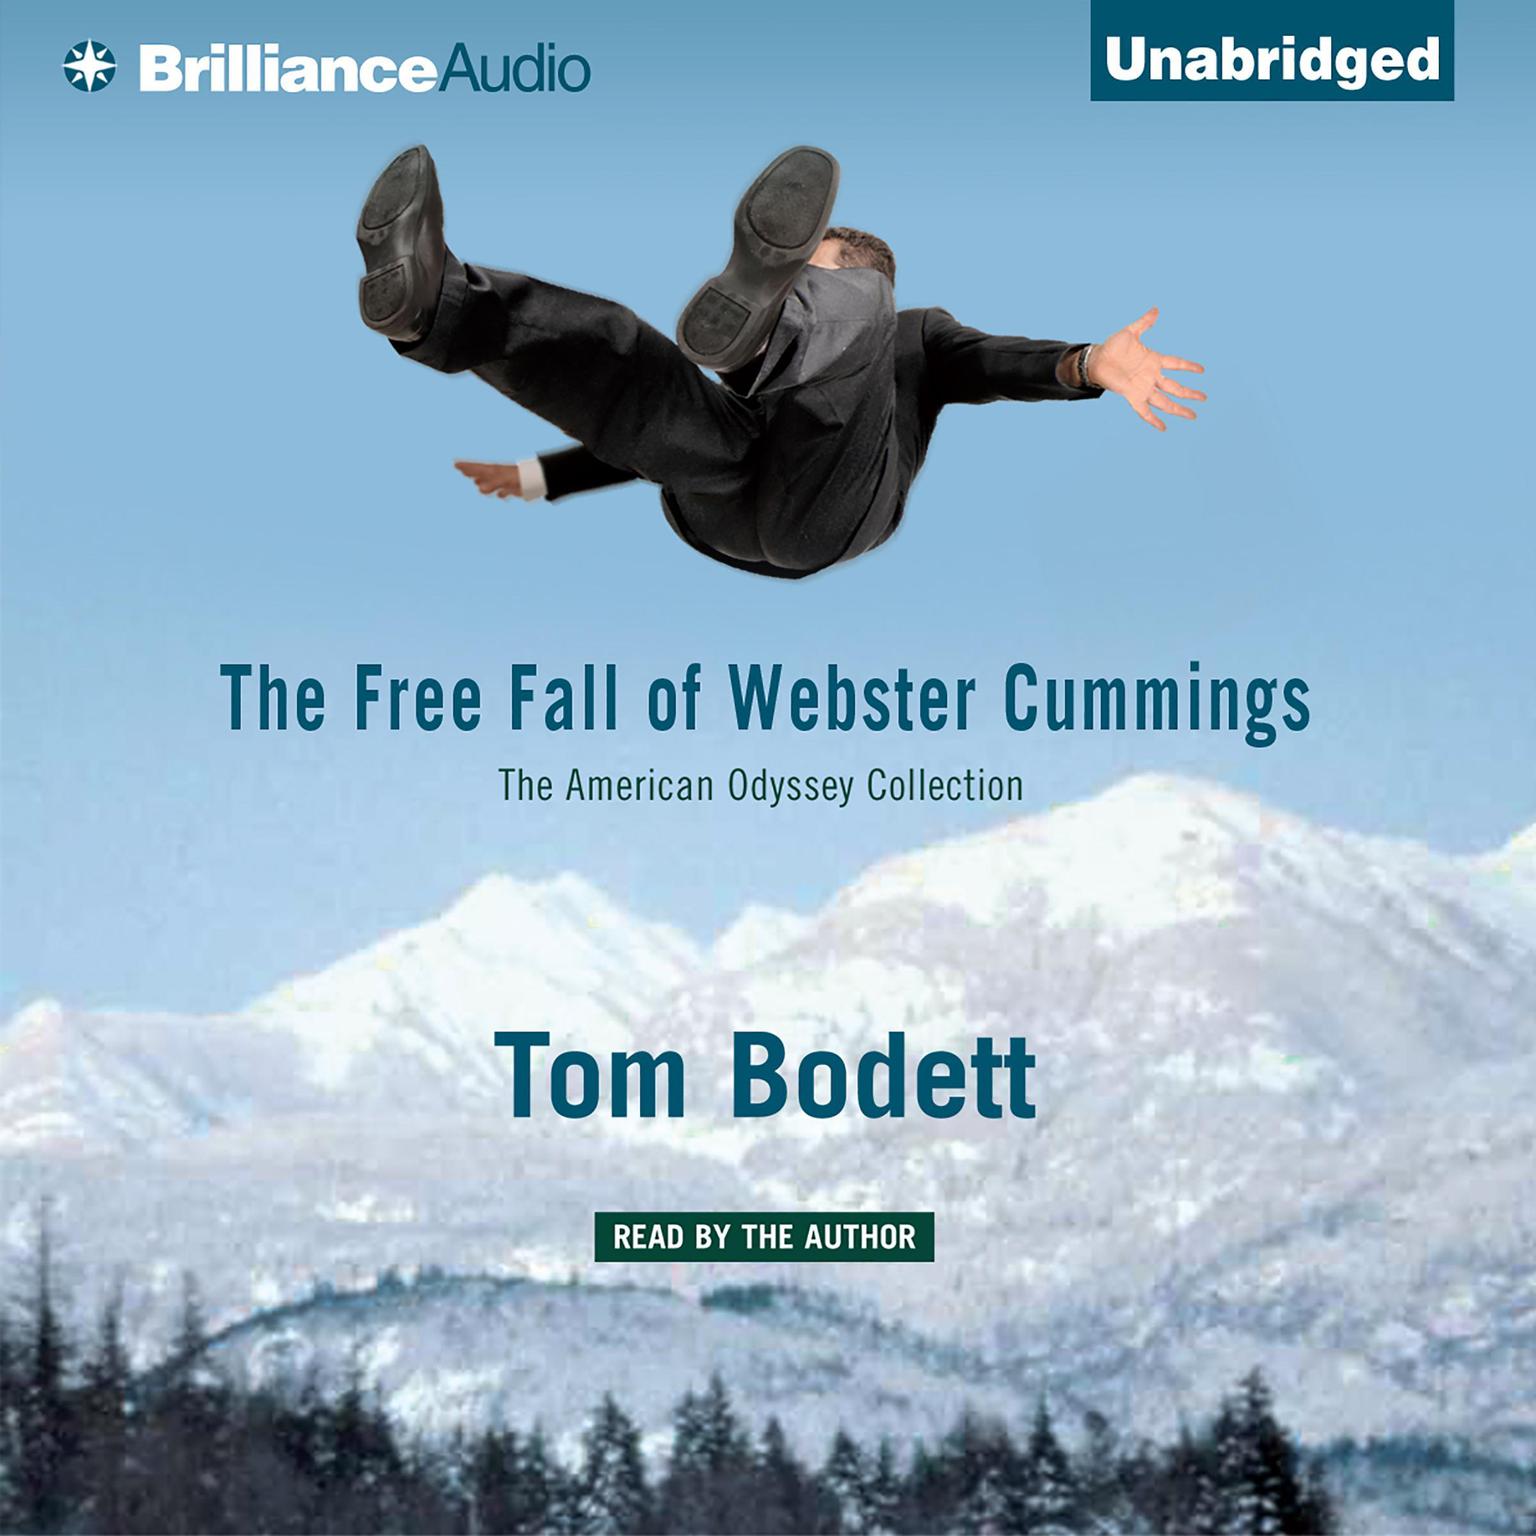 Free Fall of Webster Cummings, The - The American Odyssey Collection Audiobook, by Tom Bodett